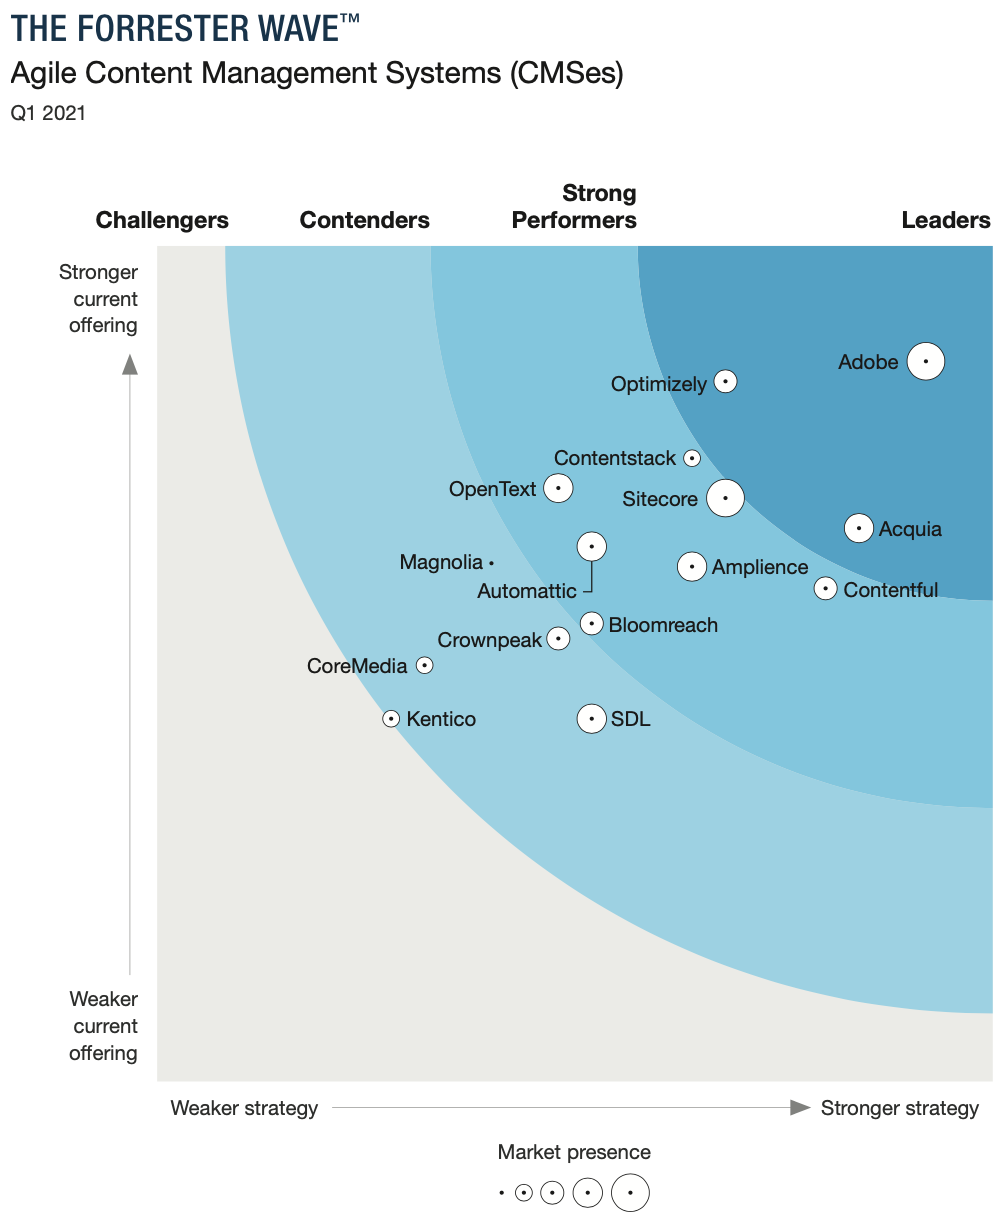 Acquia shown as a Leader together with Adobe and Optimizely